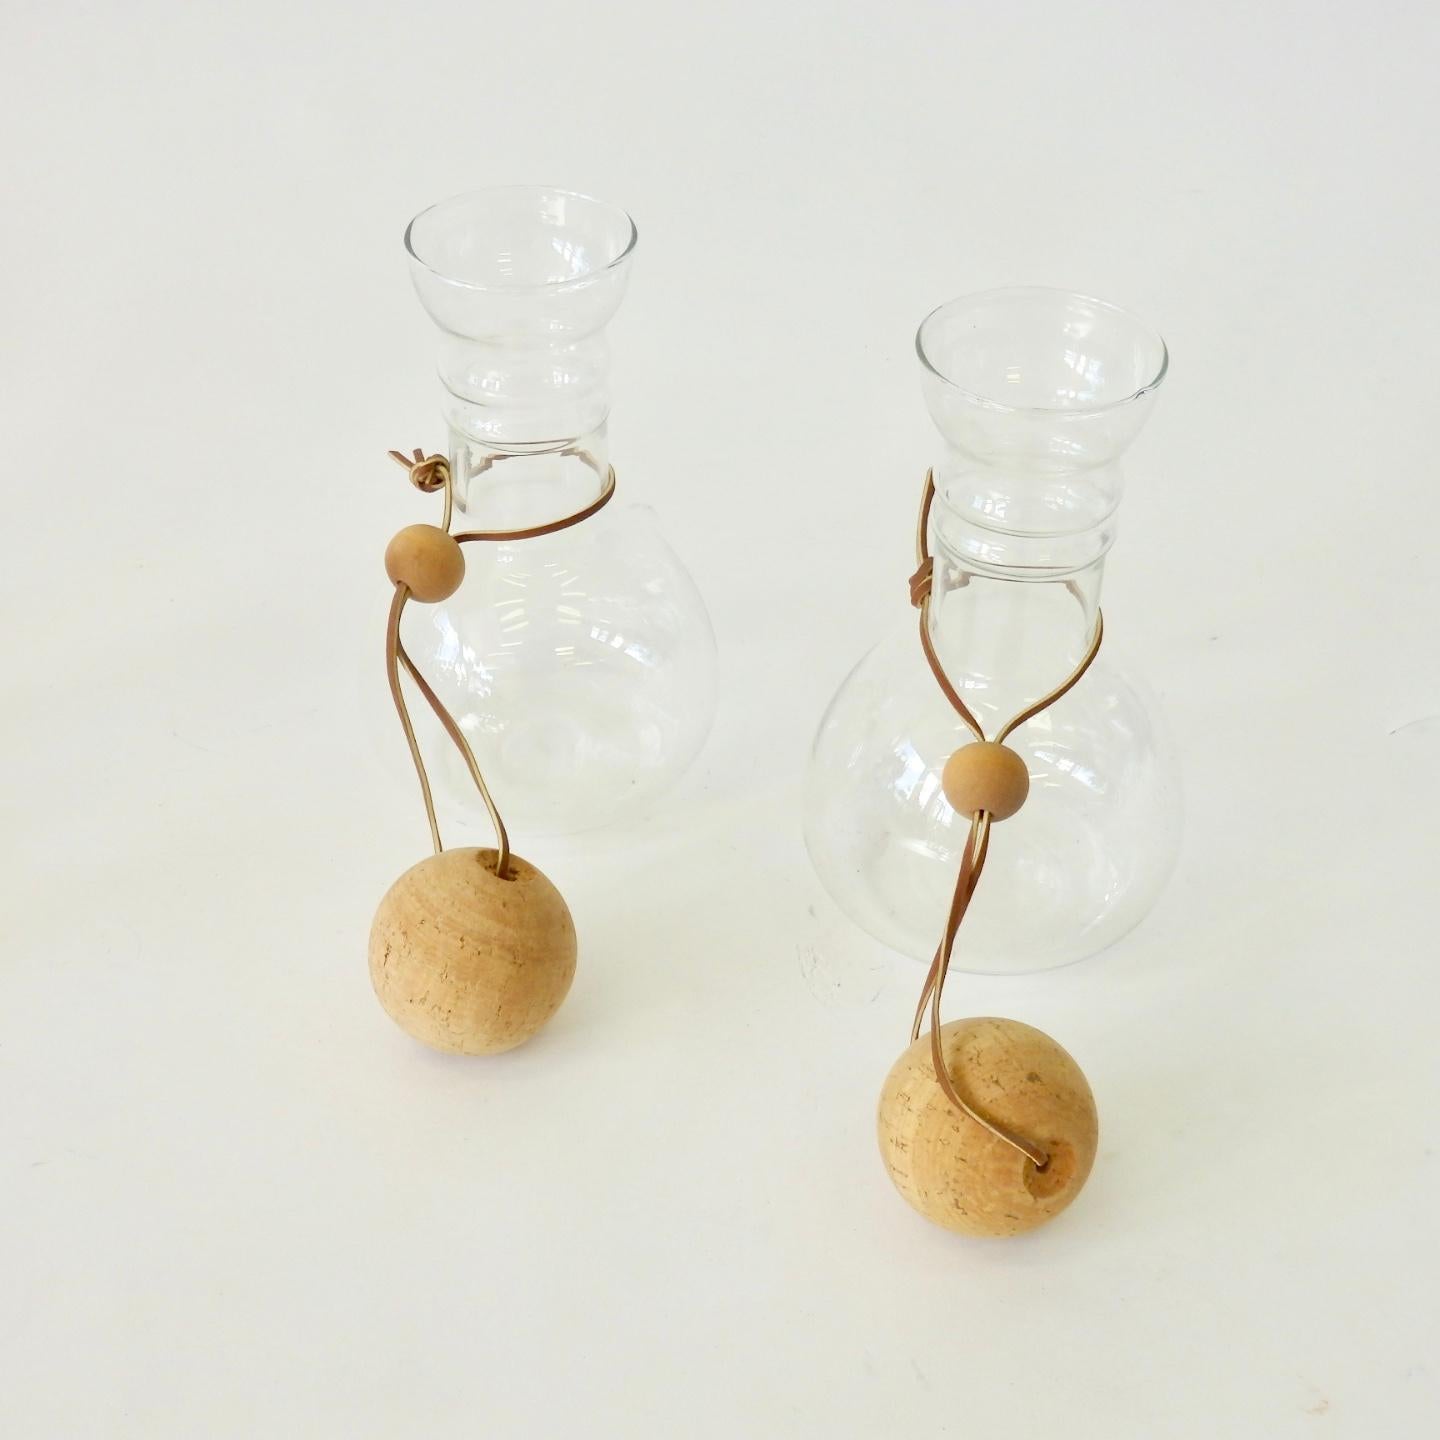 cork ball for wine decanter